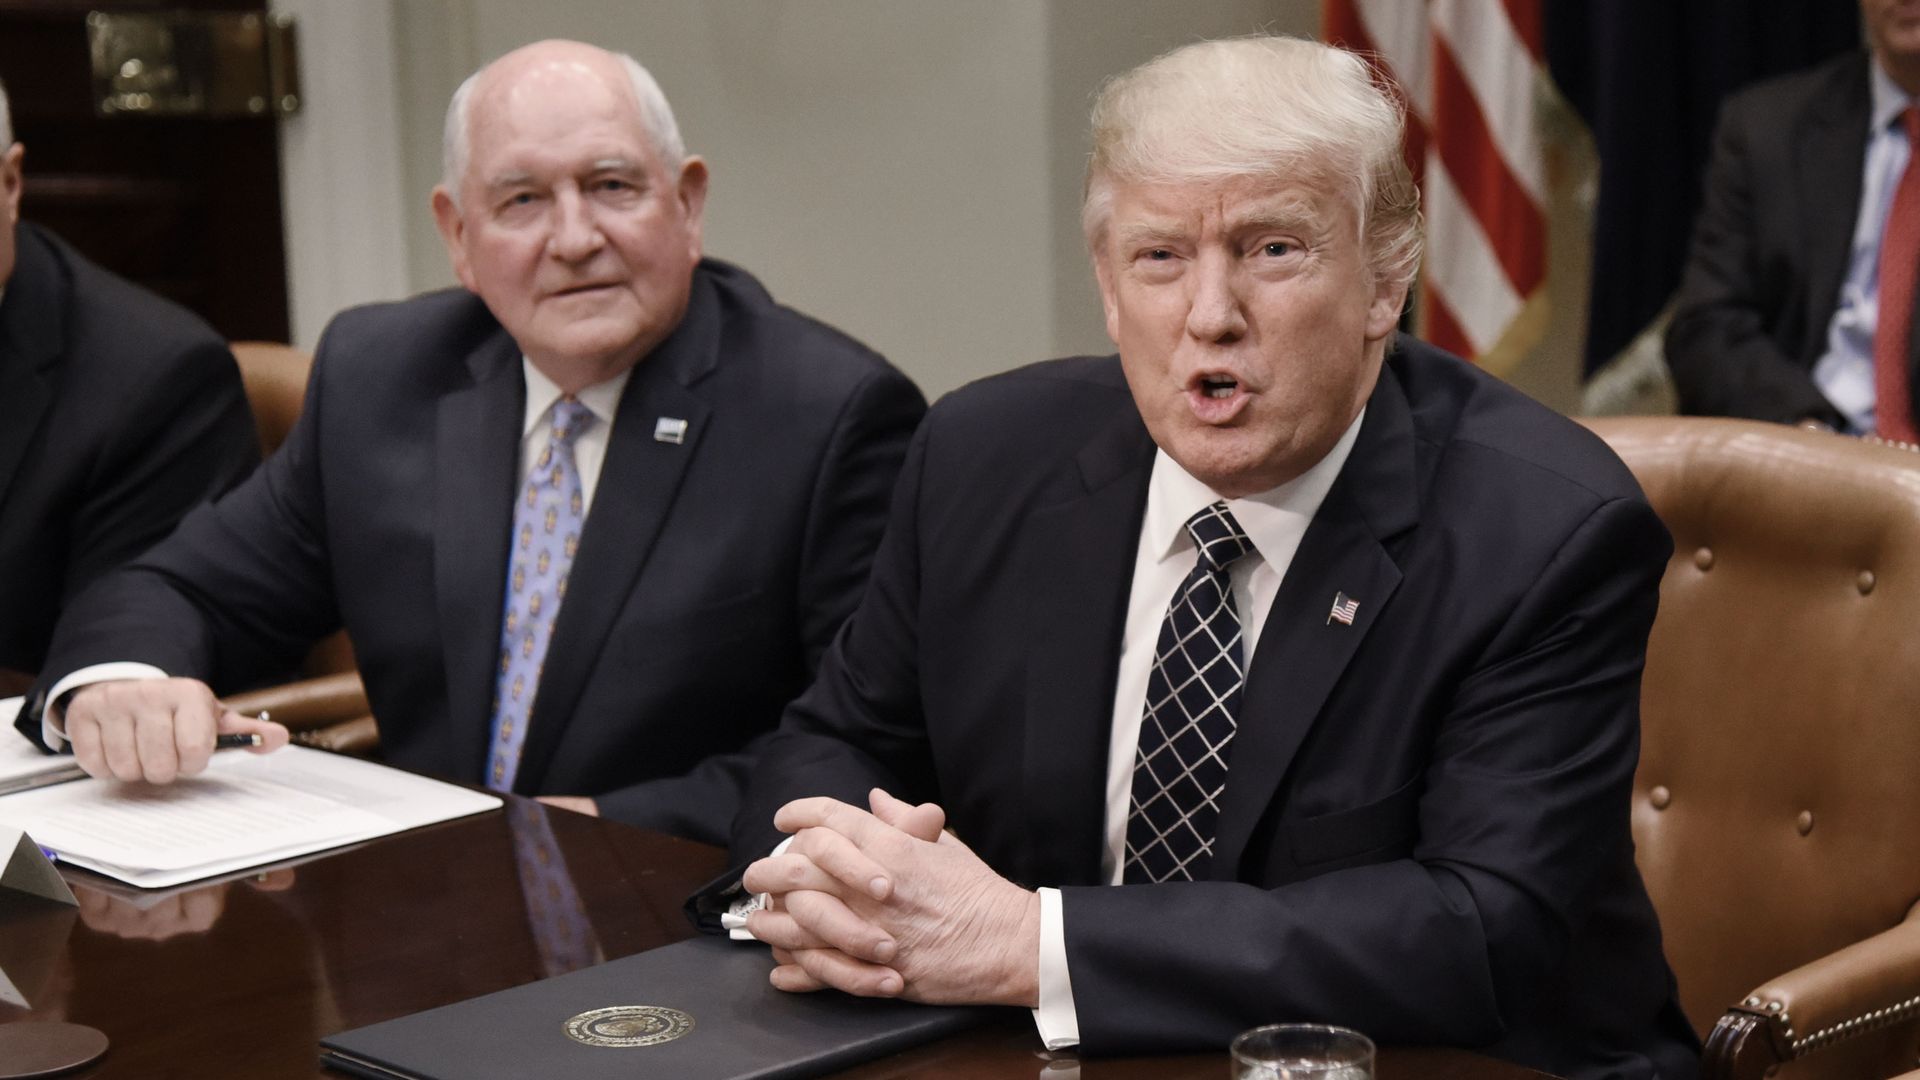 US President Donald speaks as Agriculture Secretary Sonny Perdue looks on during a roundtable with farmers in the Roosevelt Room of the White House on April 25, 2017 in Washington, DC. 